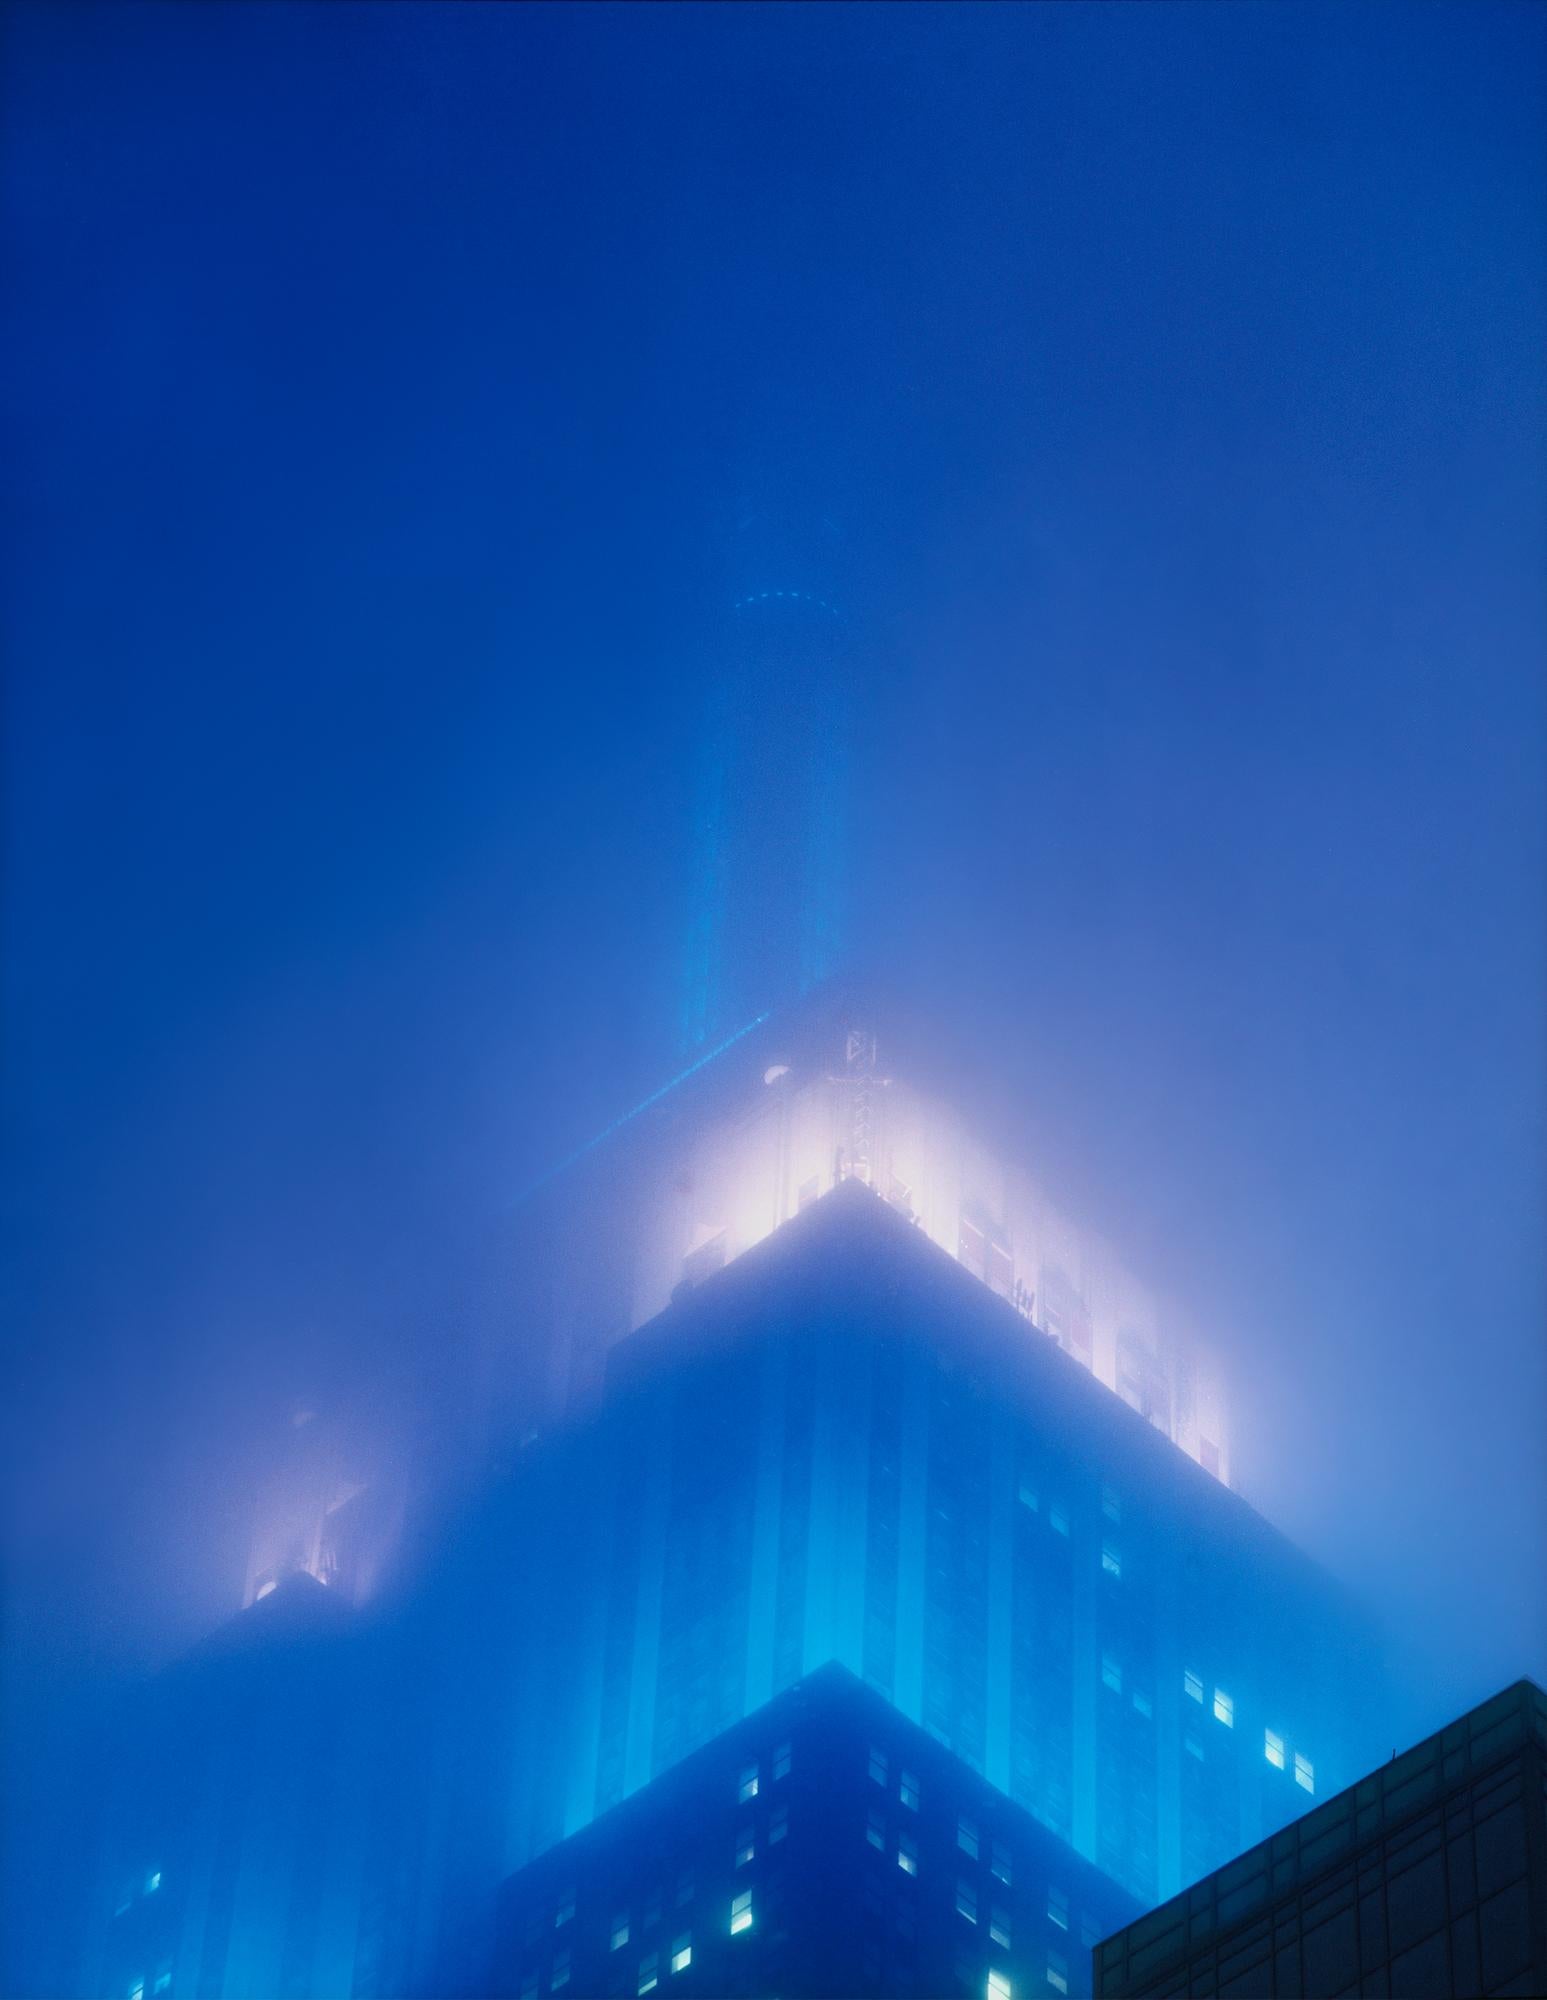 Richard Heeps Color Photograph - NOMAD II, New York - Contemporary architectural color photography